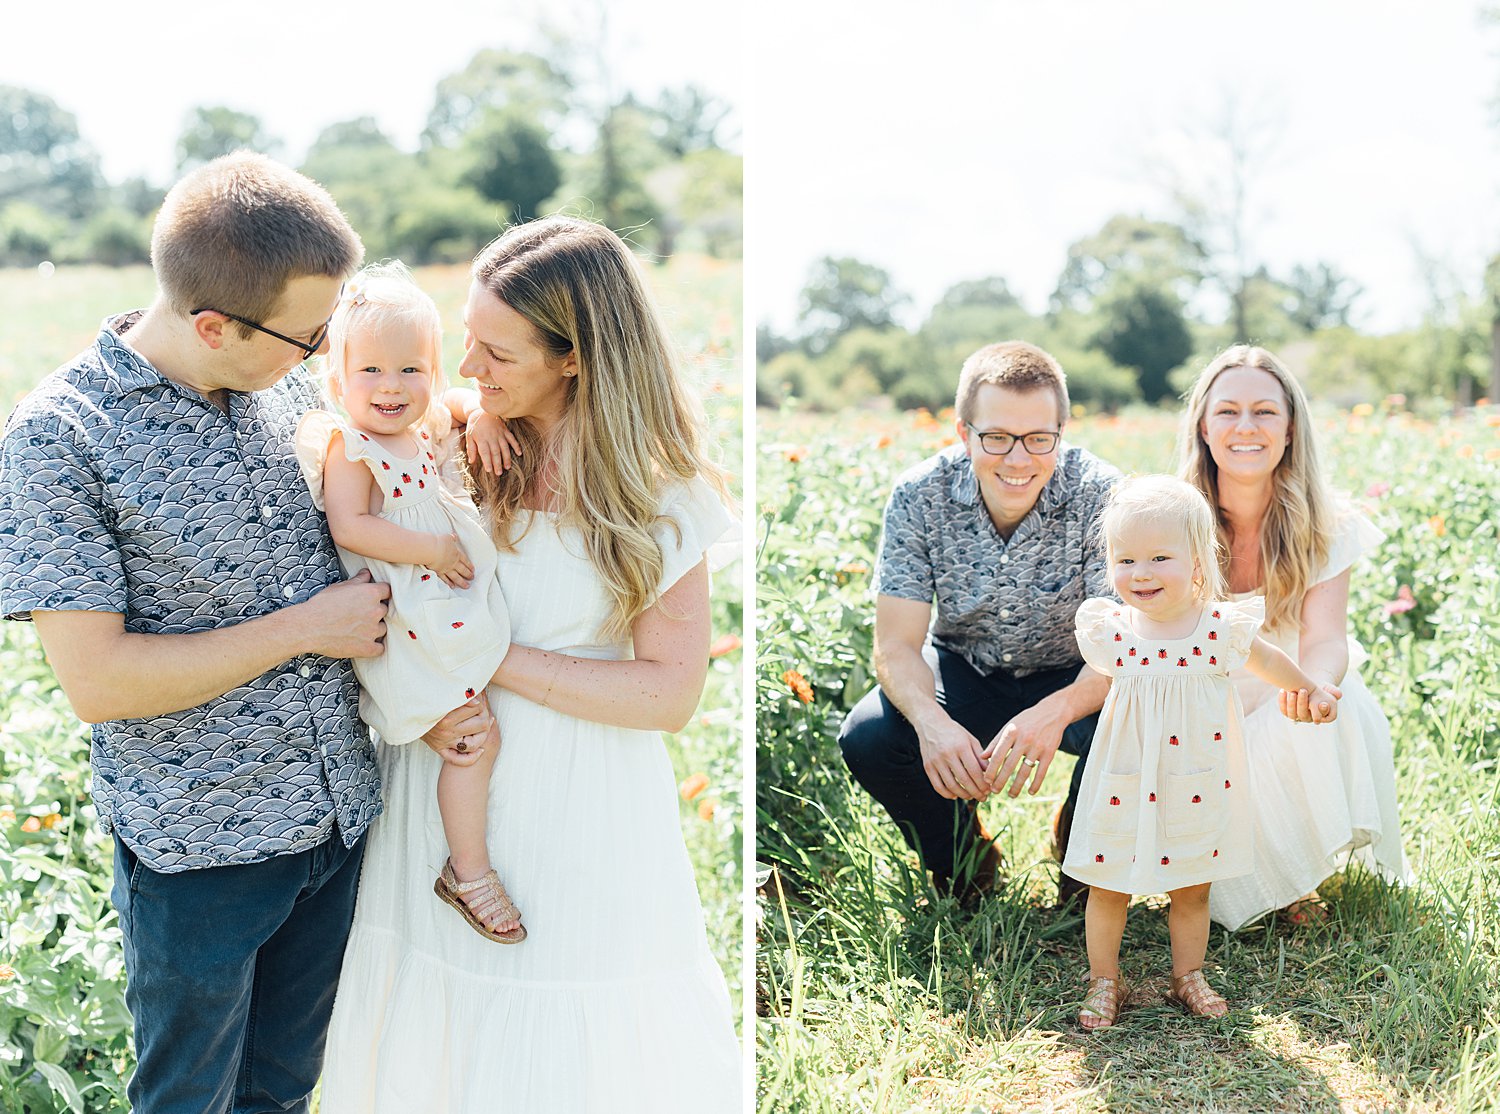 Summer Mini-Sessions - Maple Acres Flower Farm - Montgomery County Maryland family photographer - Alison Dunn Photography photo